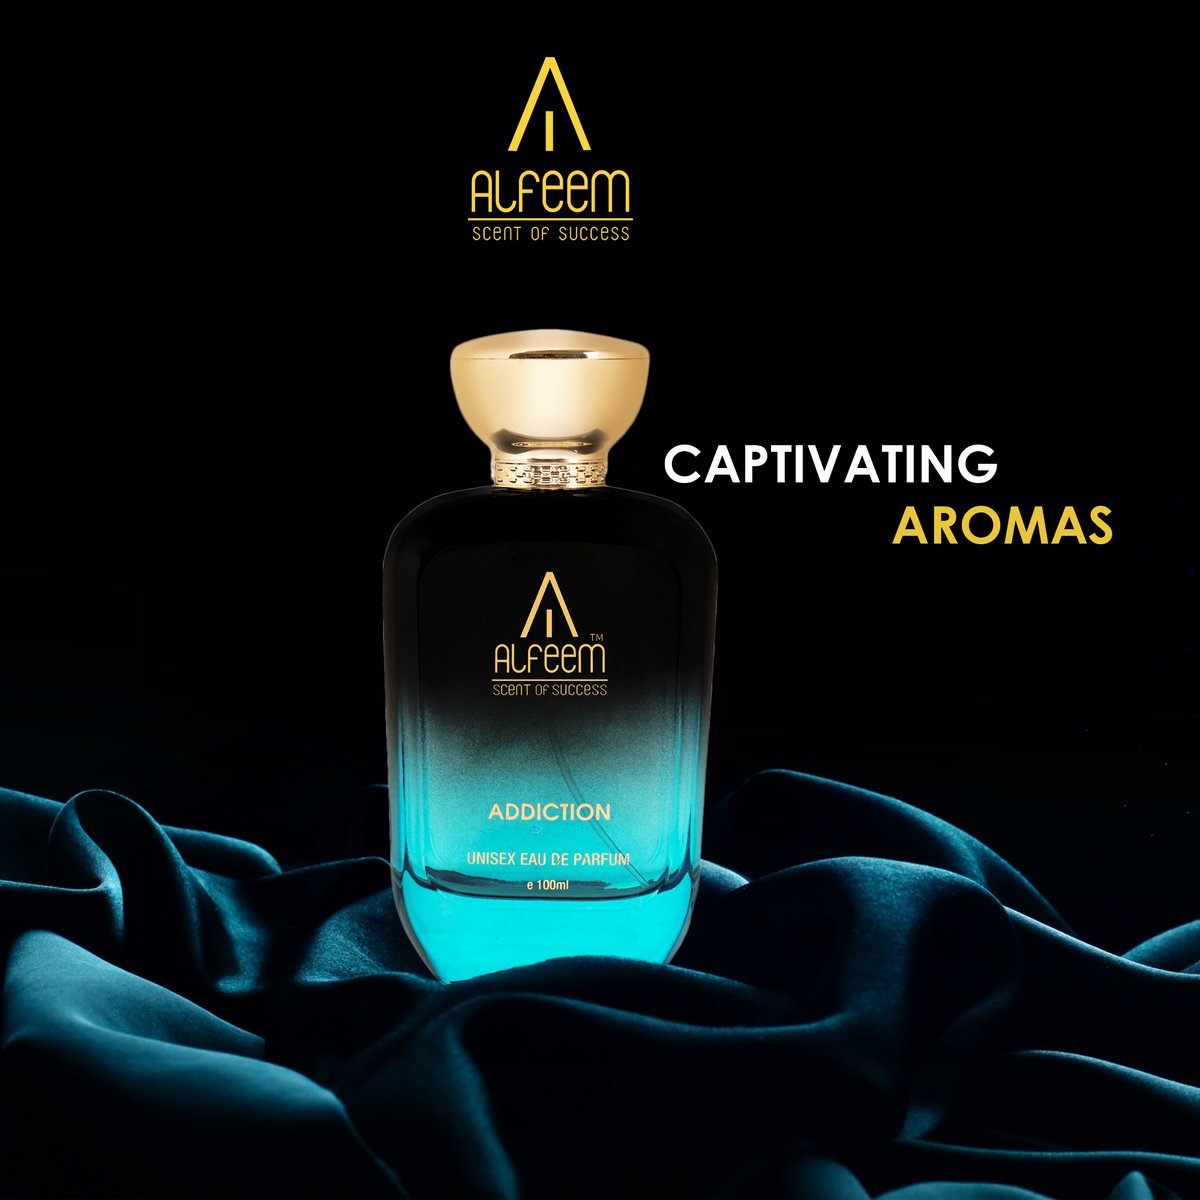 Caught in the grip of addiction, lost in an endless maze. #AlfeemLifestyle #PerfumeObsession #ScentAddict #FragranceLover #SignatureScent #PerfumePassion #ScentOfTheDay #LuxuryFragrance #PerfumeCollection #FragranceJunkie #PerfumeEnthusiast #PerfumeAddict #PerfumeLove